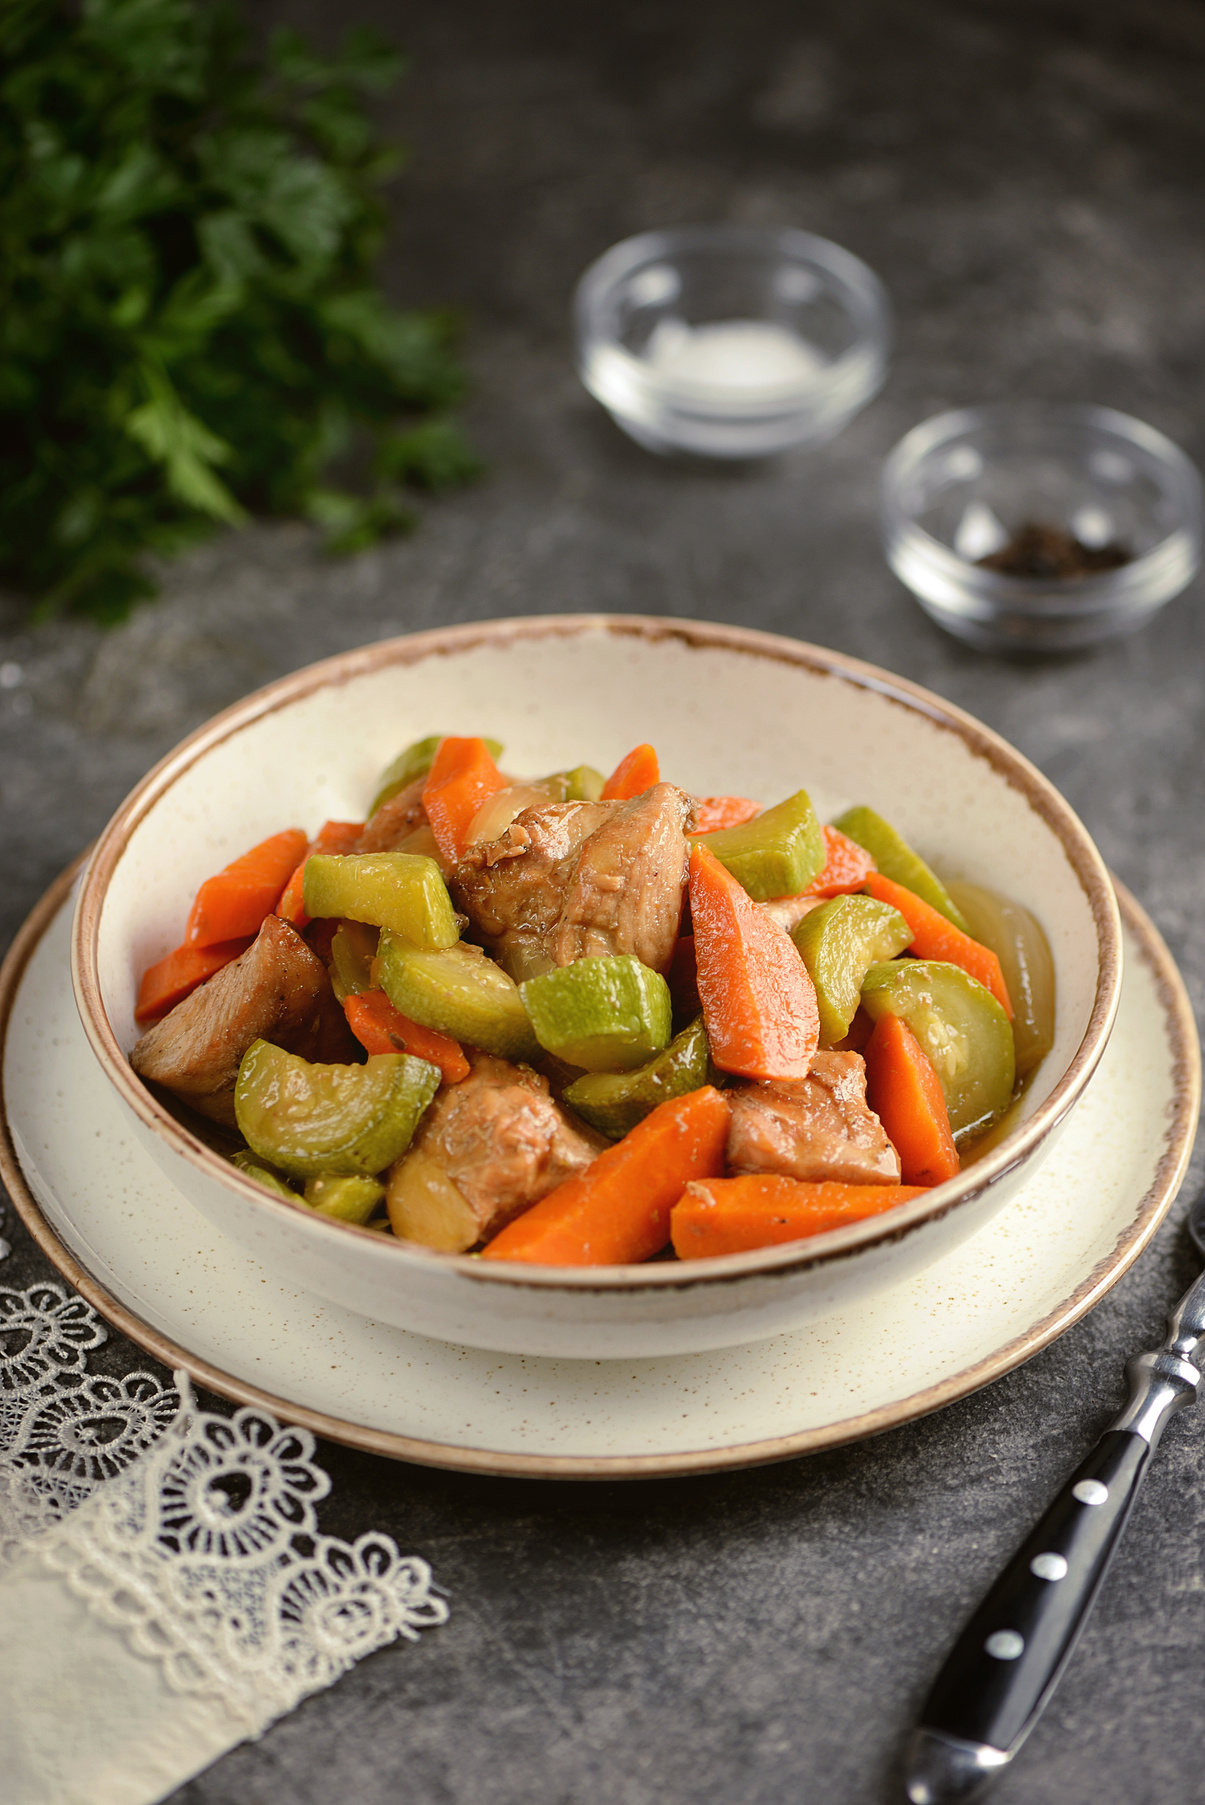 Turkey fillet with carrots, onions and zucchini. Healthly food.